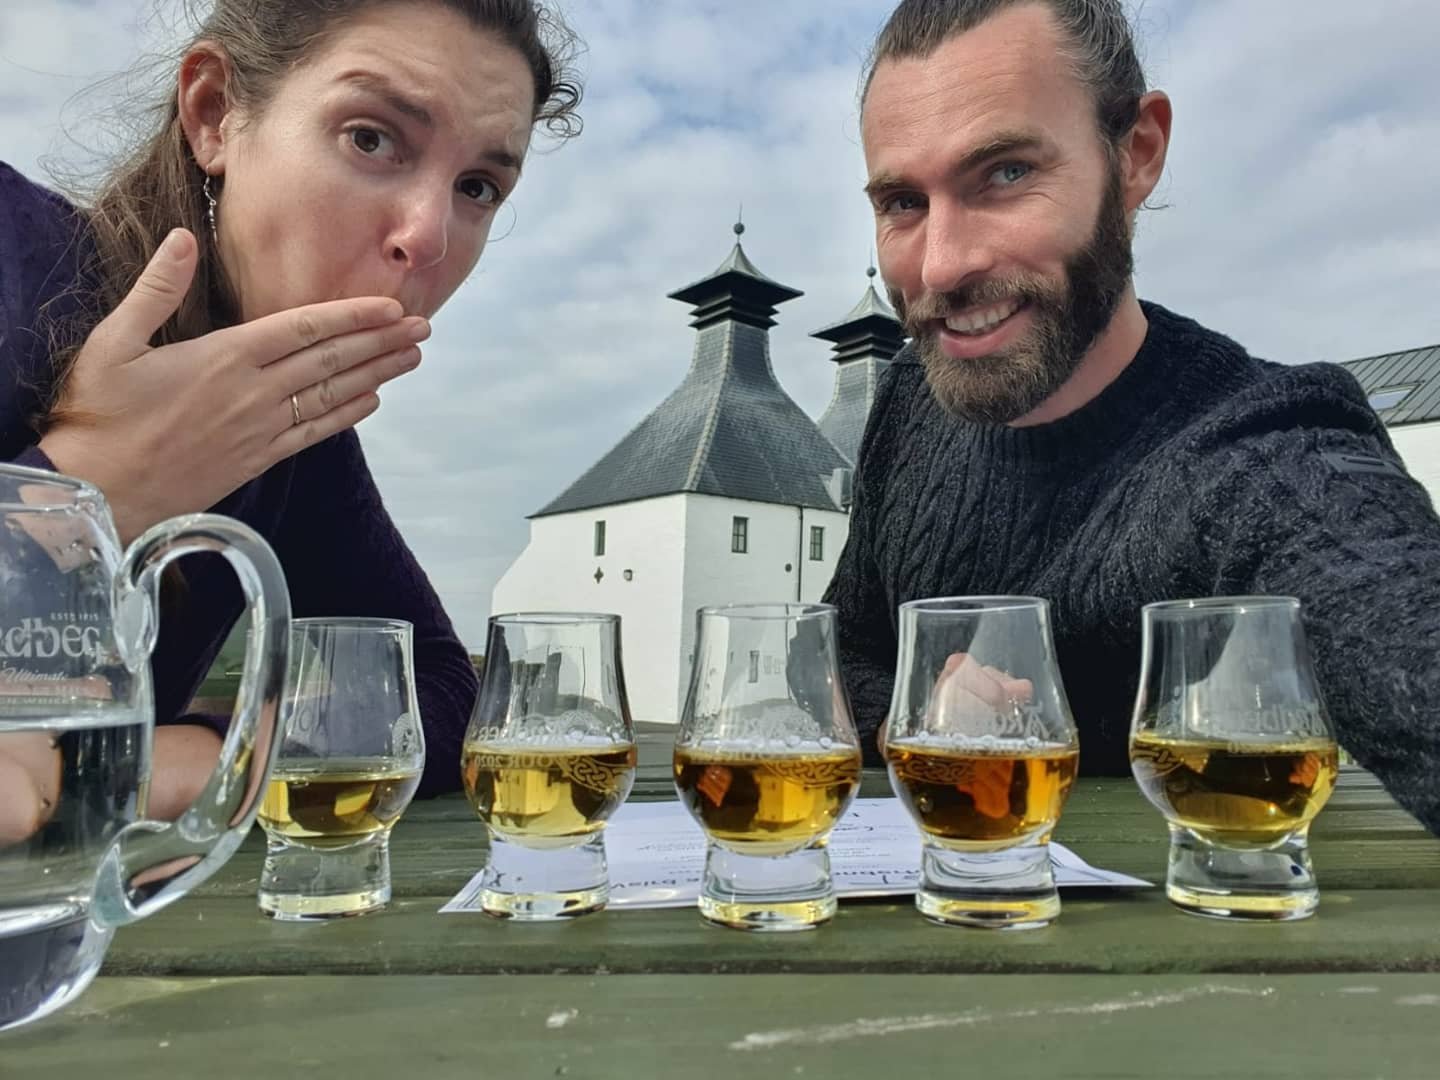 We_sampled_different_kinds_of_whisky_at_some_distilleries_on_Islay._We_had_many_delicious_drams!.jpg